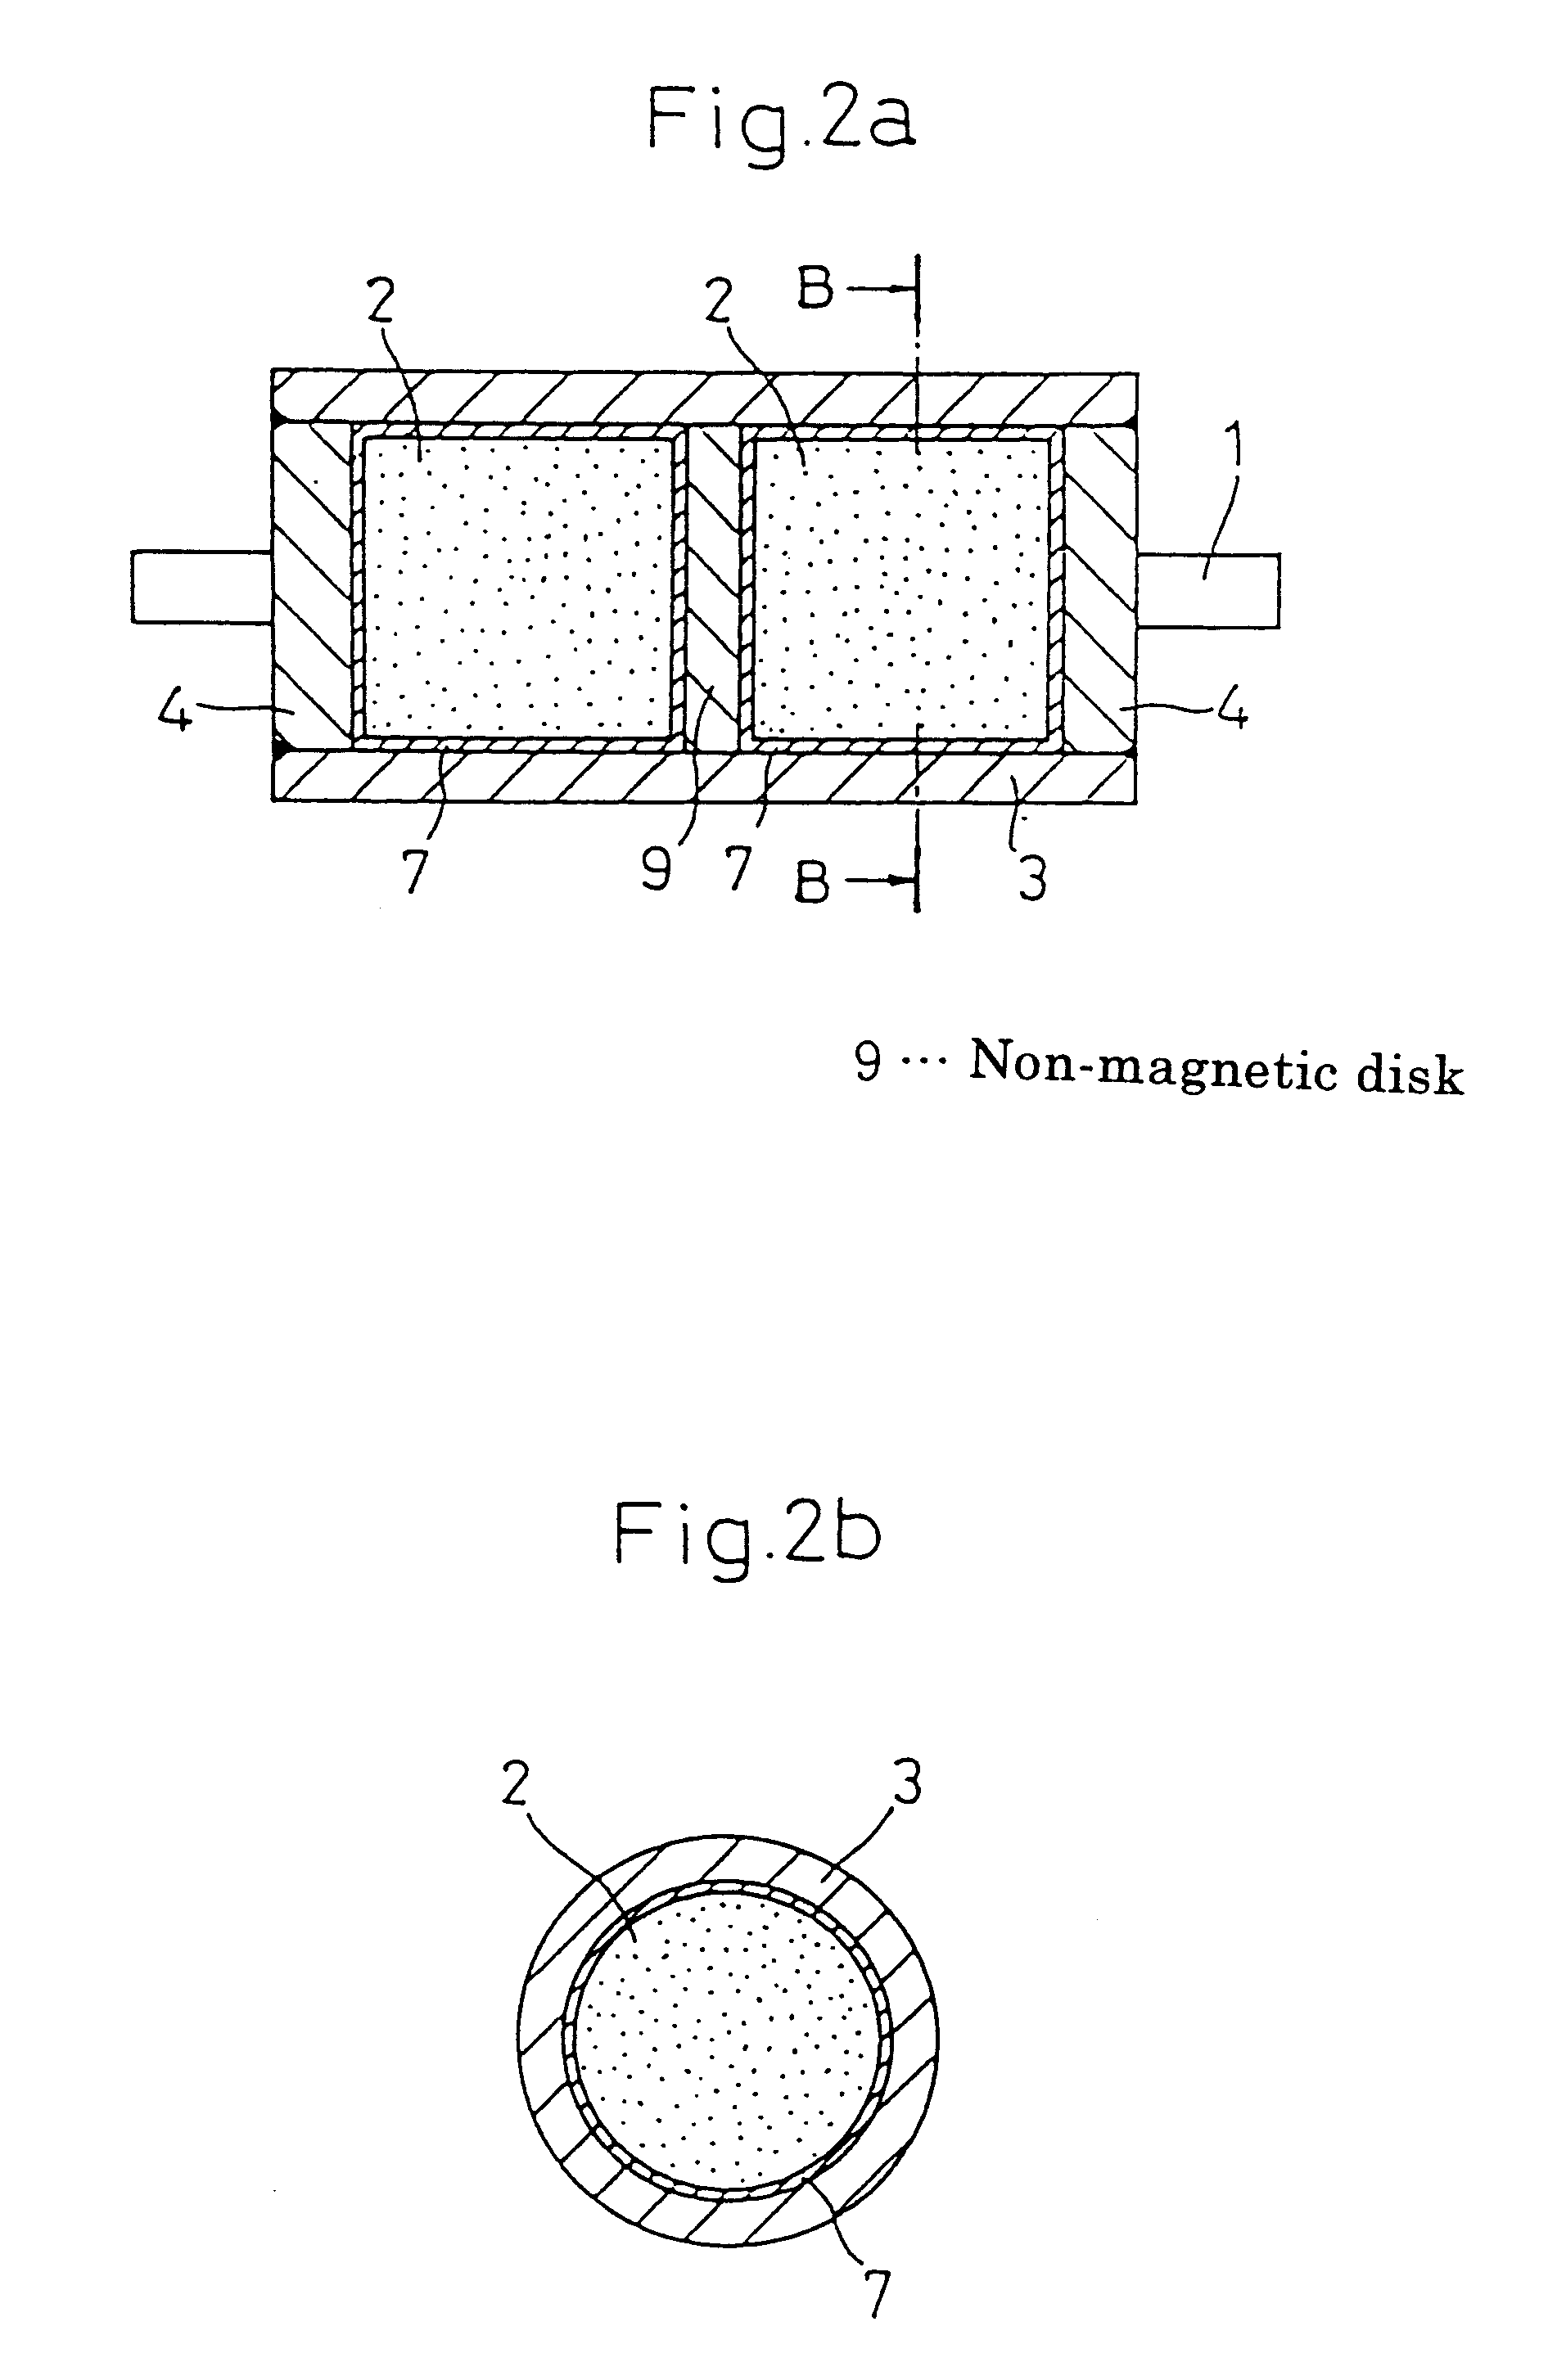 Monolithically bonded construct of rare-earth magnet and metal material and method for bonding same